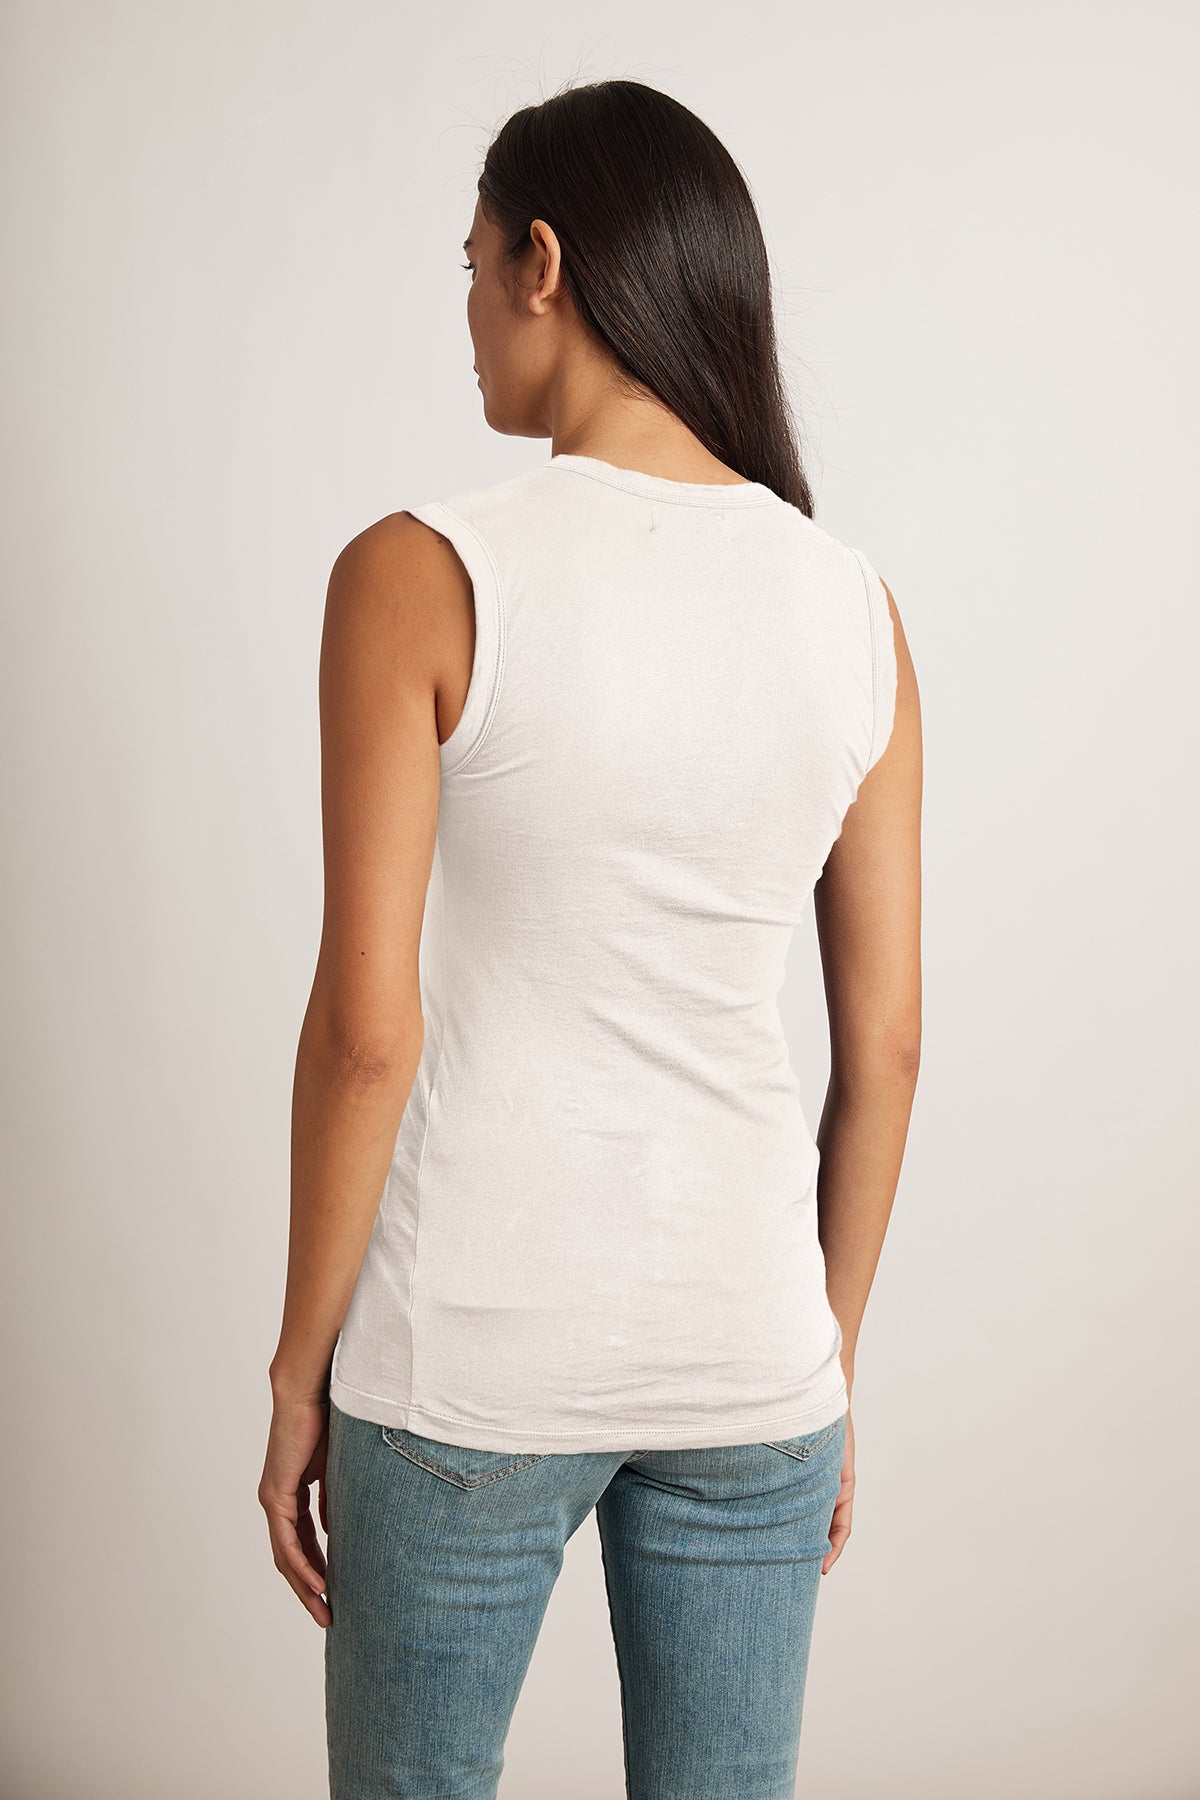   The back view of a woman wearing jeans and a Velvet by Graham & Spencer ESTINA GAUZY WHISPER FITTED TANK TOP. 